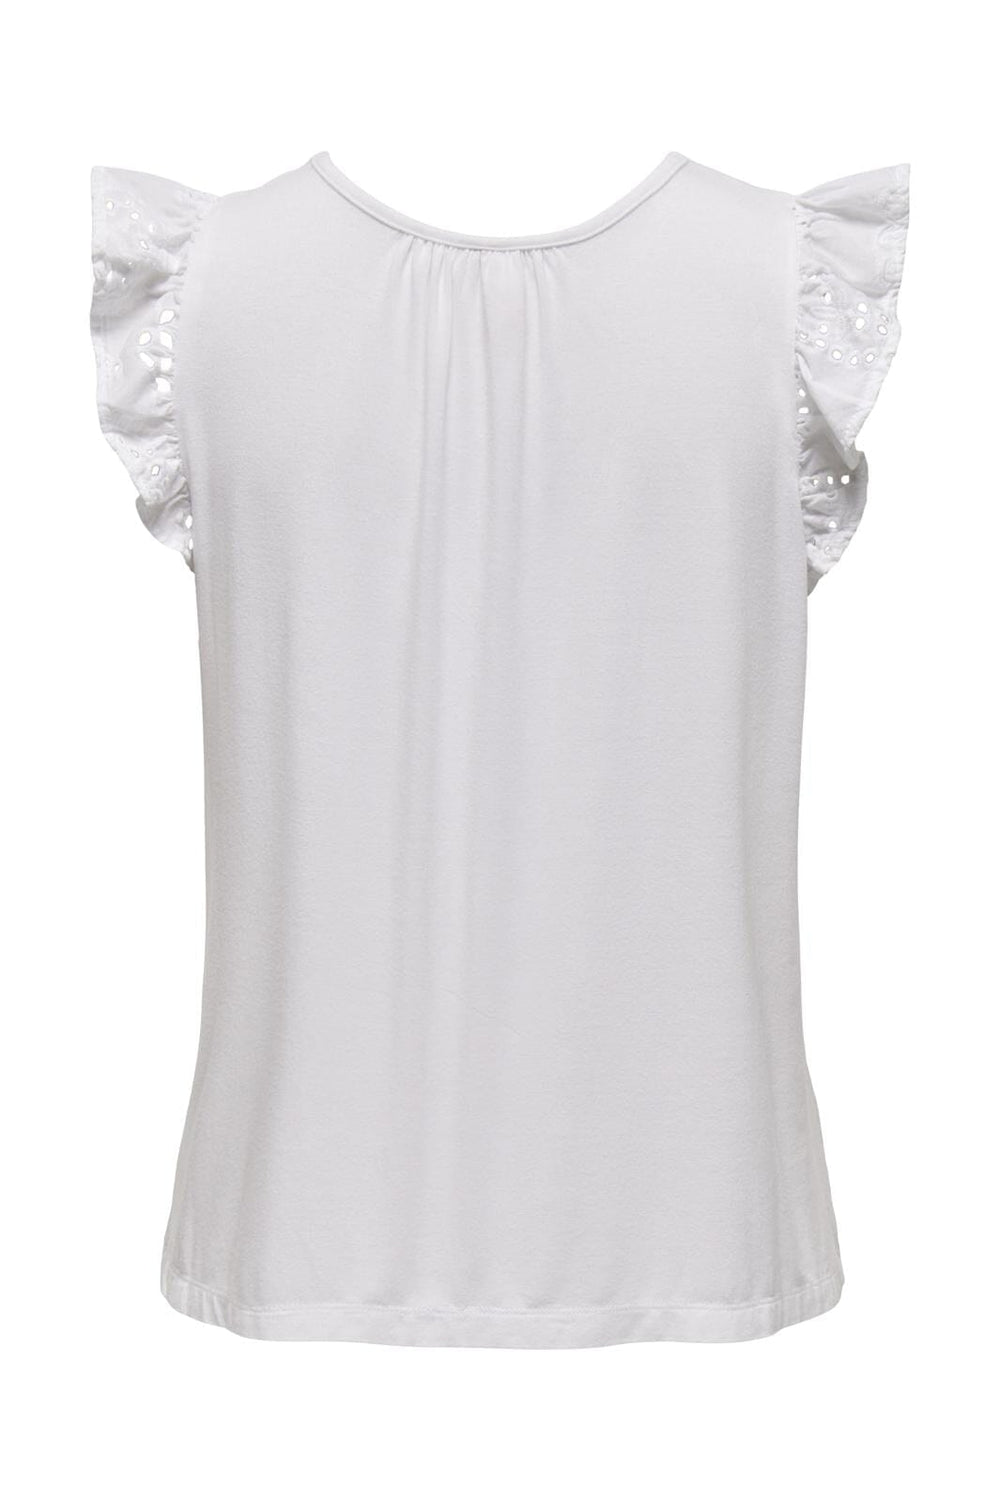 Only - Onlmarga Zindy Life Capsleeve Top - 4459939 Bright White